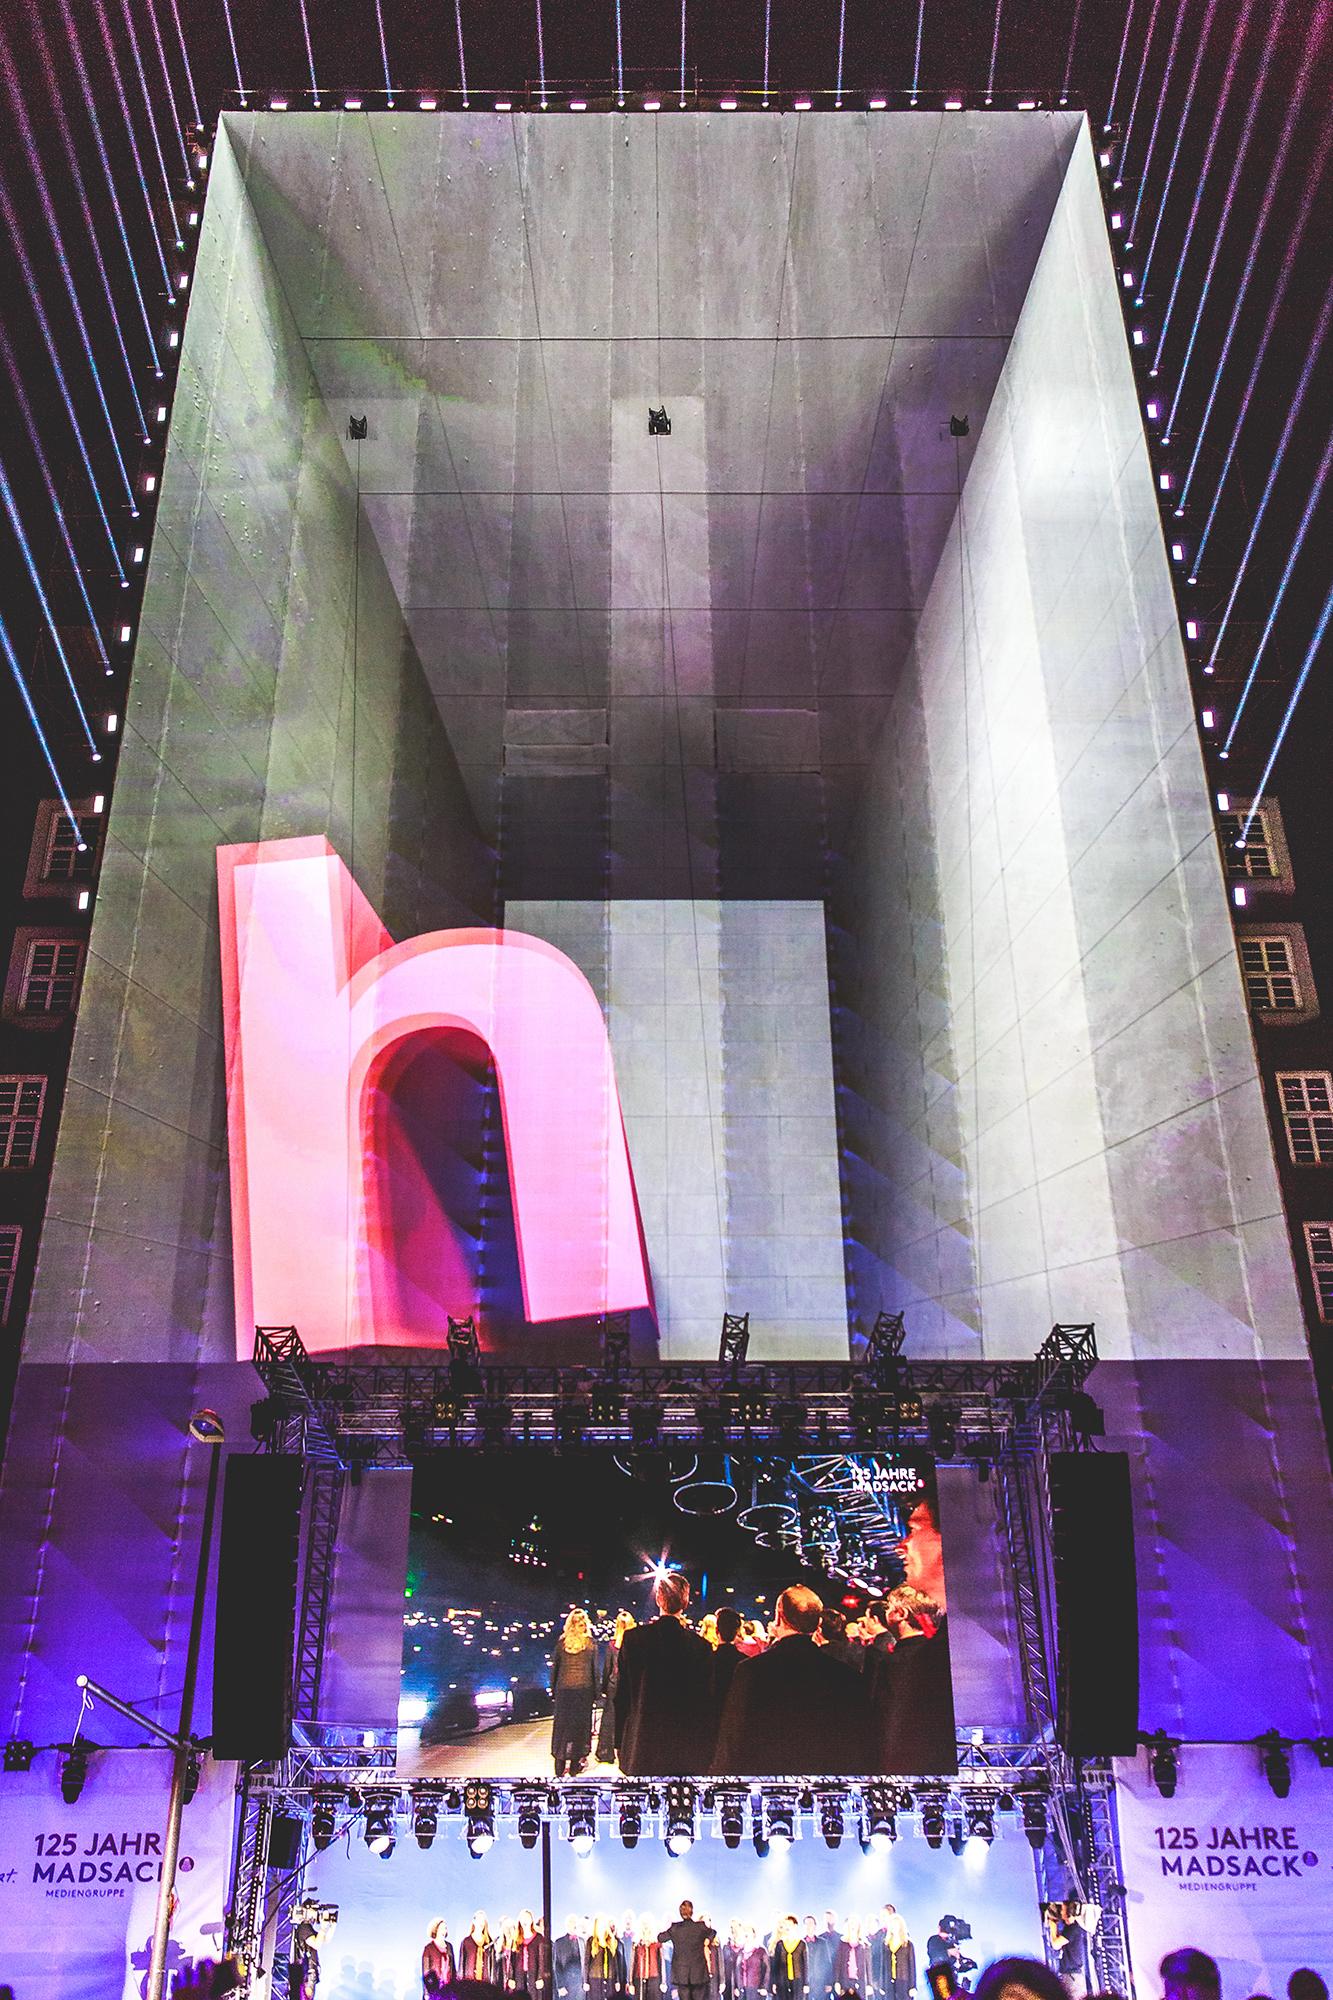 Video mapping of the letter "h" in a concrete hall on a large vertical stage. A large crowd watches outdoors.